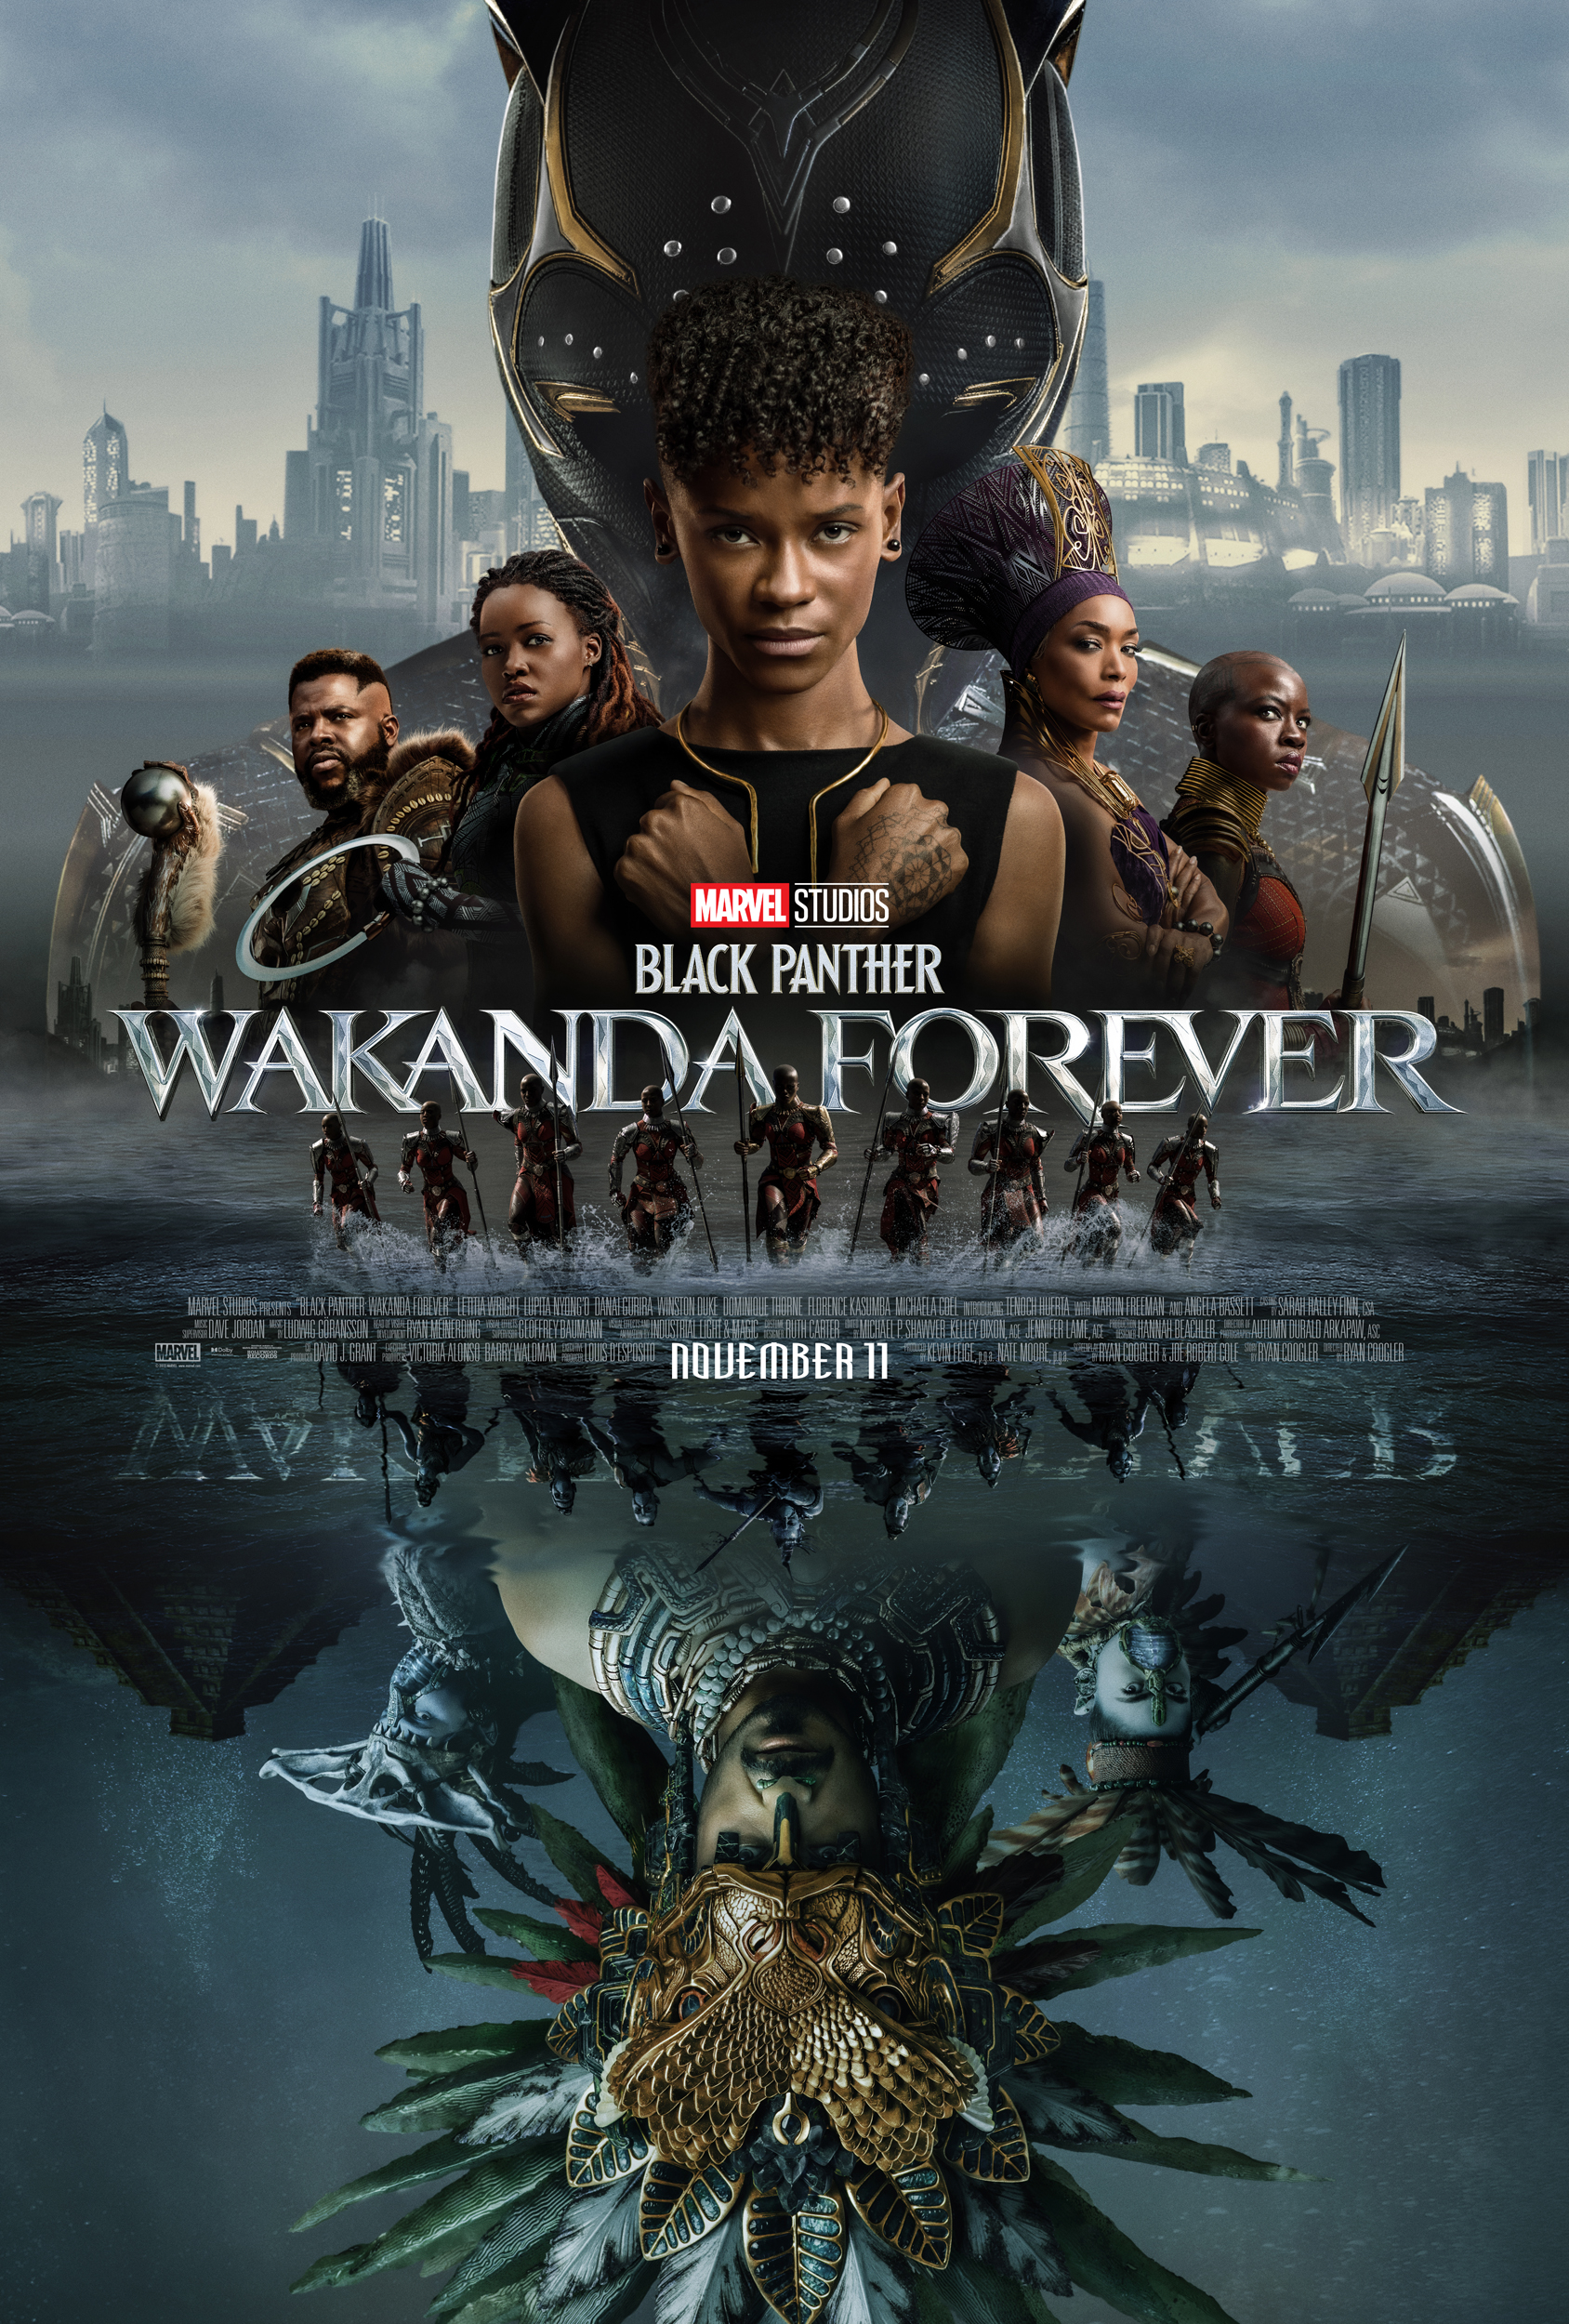 Movie Poster: Black Panther: Wakanda Forever